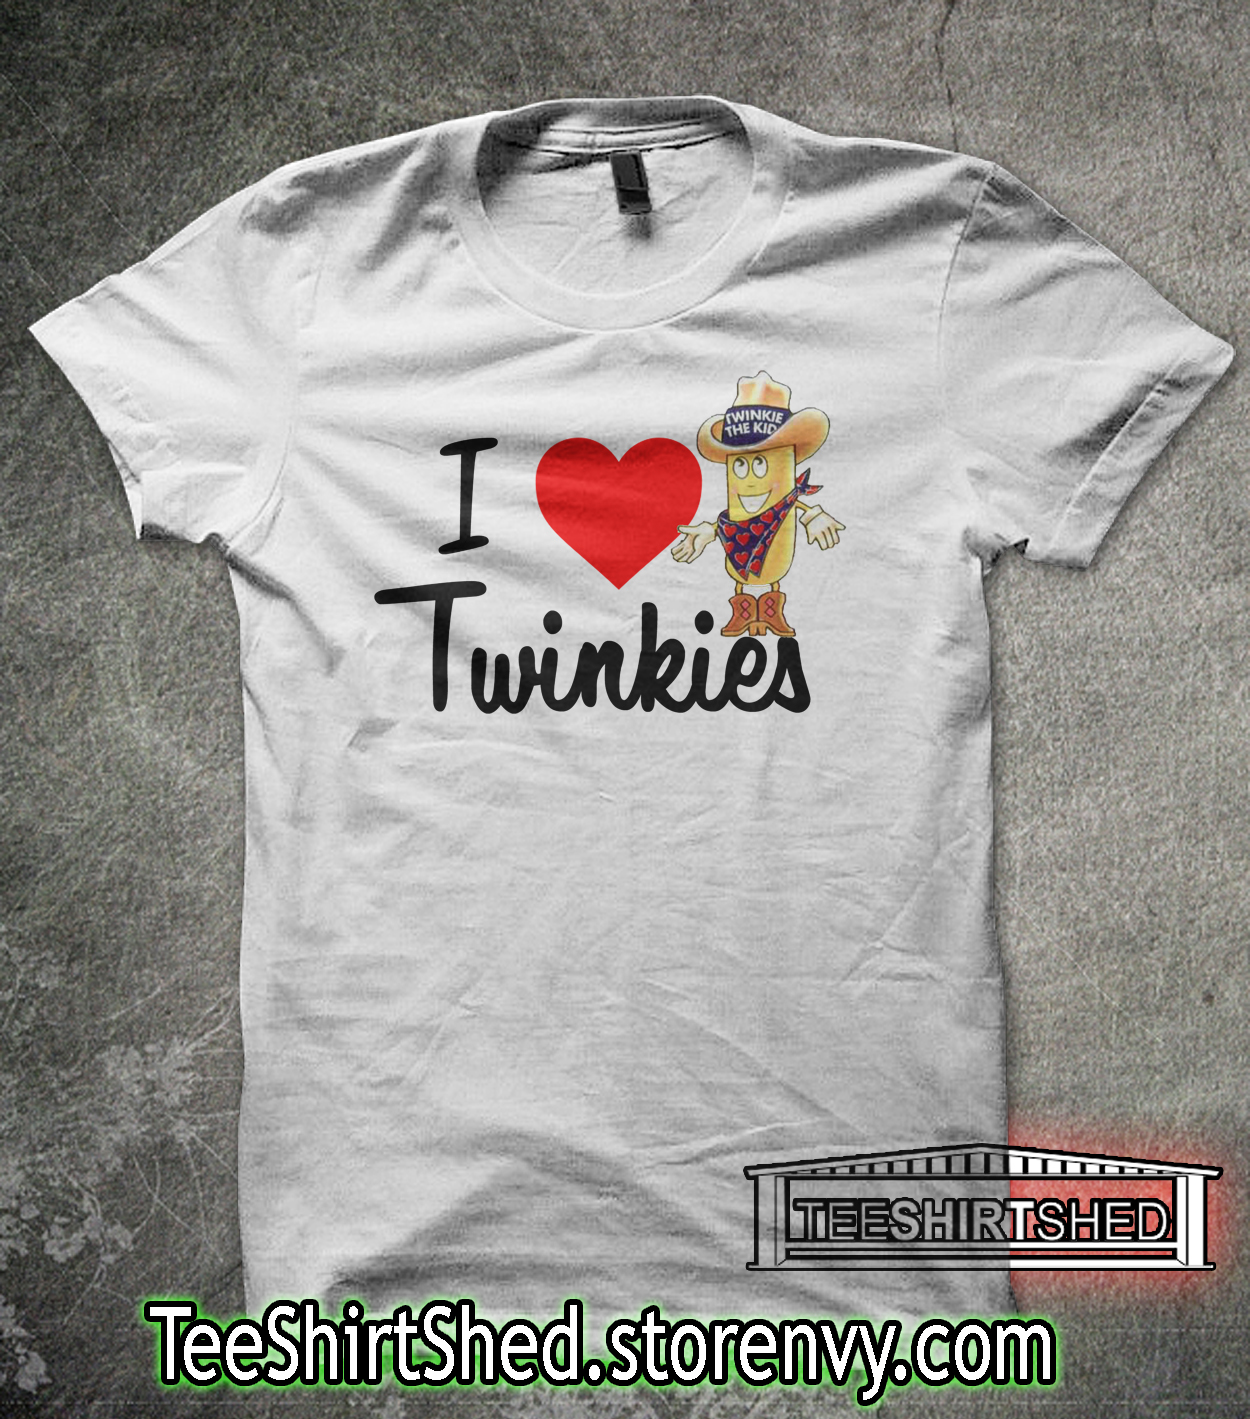 Show your love for TWINKIES!!